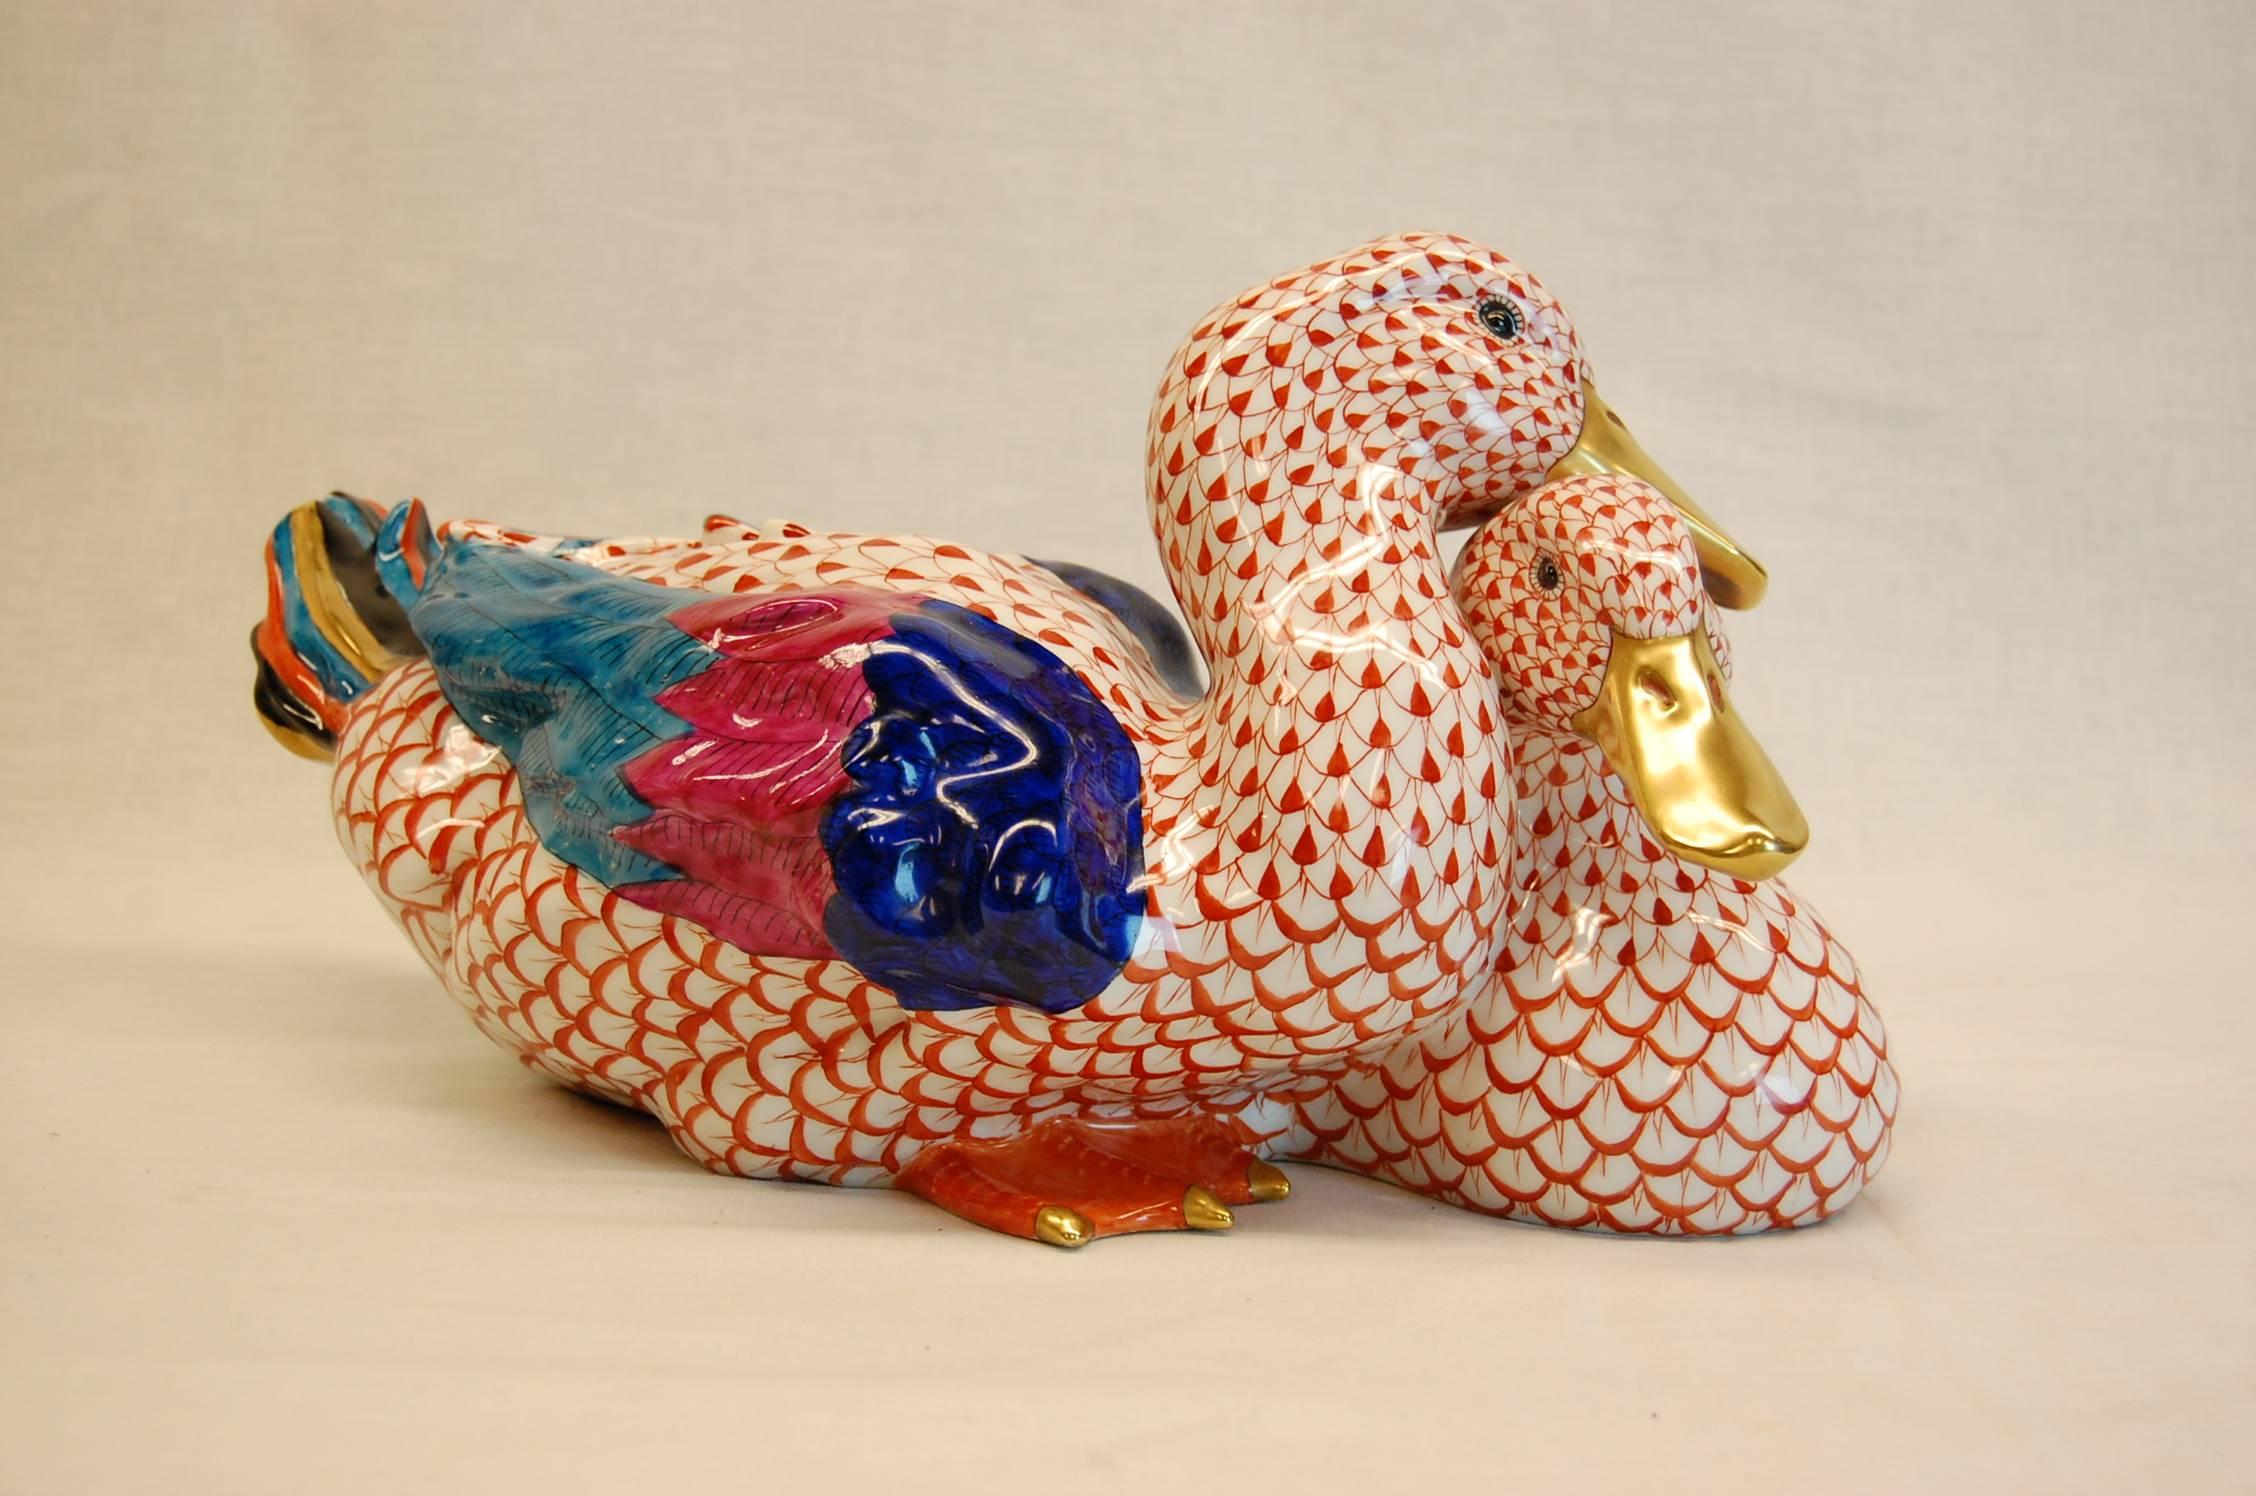 Ducks in mint condition, in Vieux Herend pattern, priced to sell quickly, circa 1995!